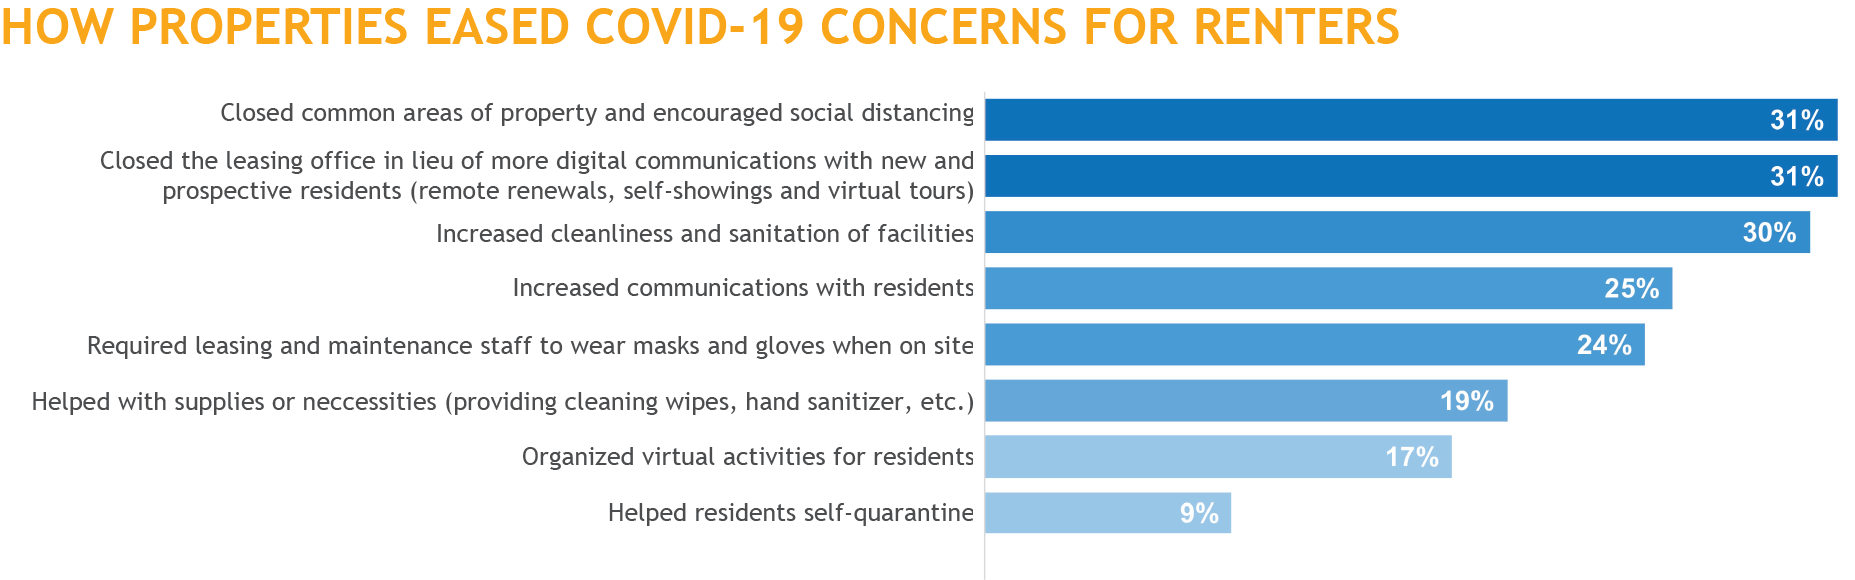 How Properties Eased COVID-19 Concerns for Renters (1)